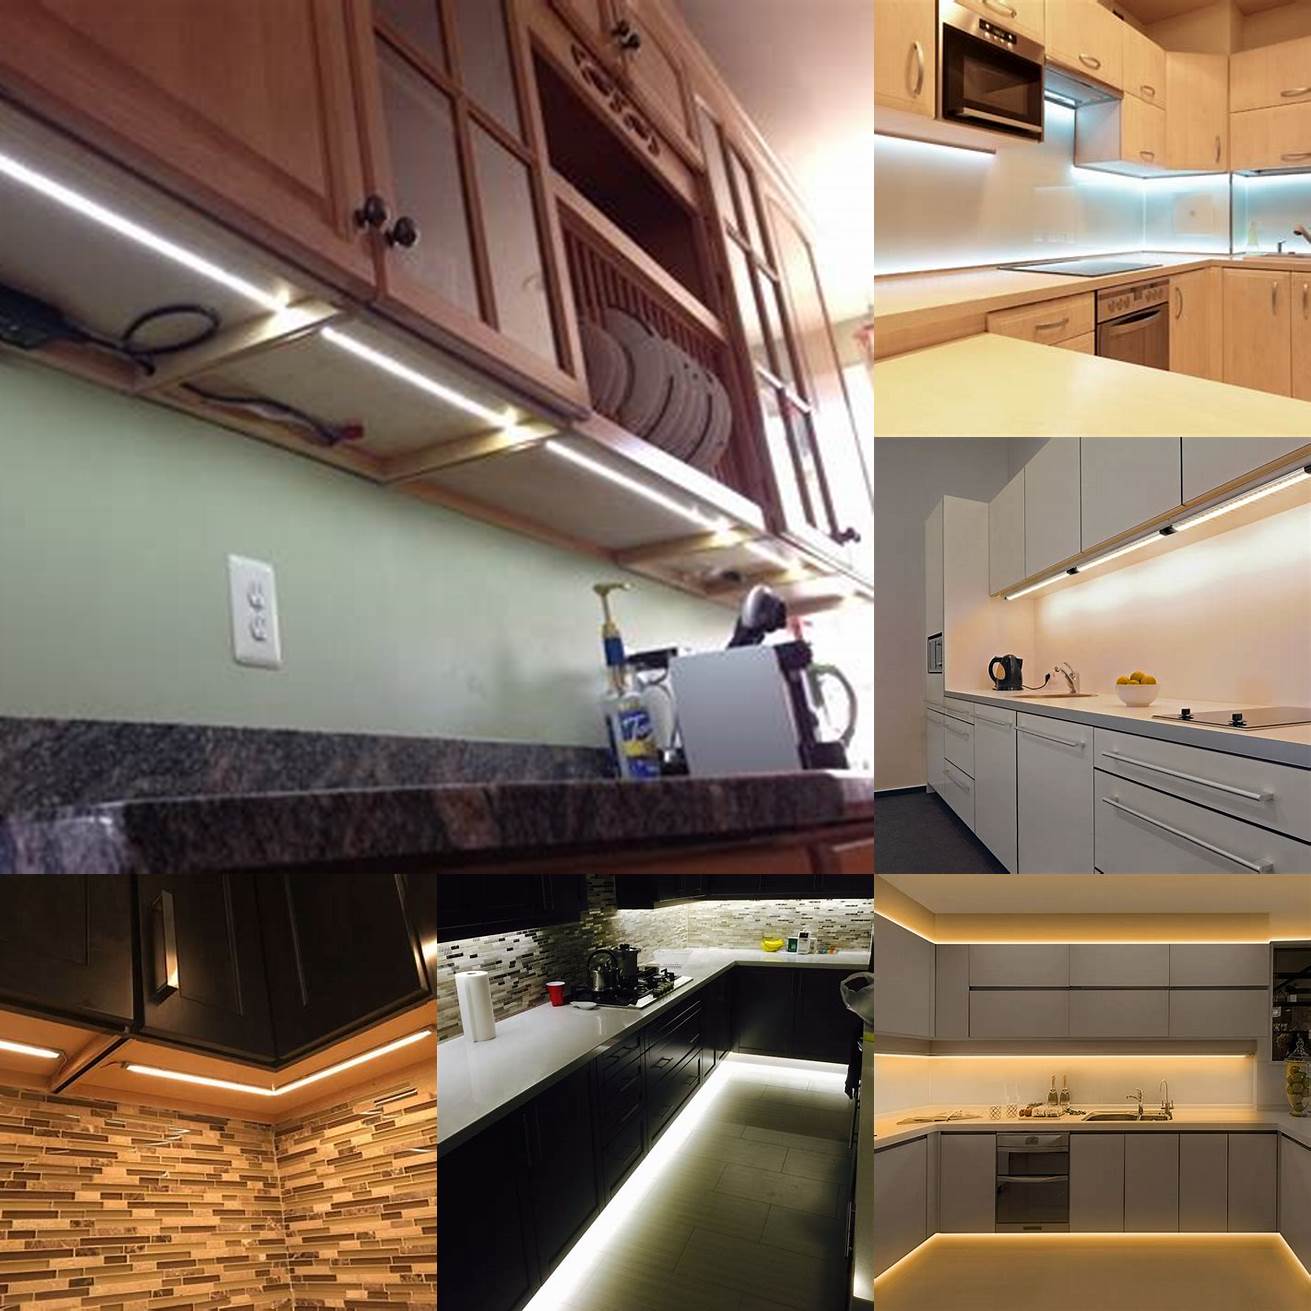 LED strip lighting a practical choice for under-cabinet lighting